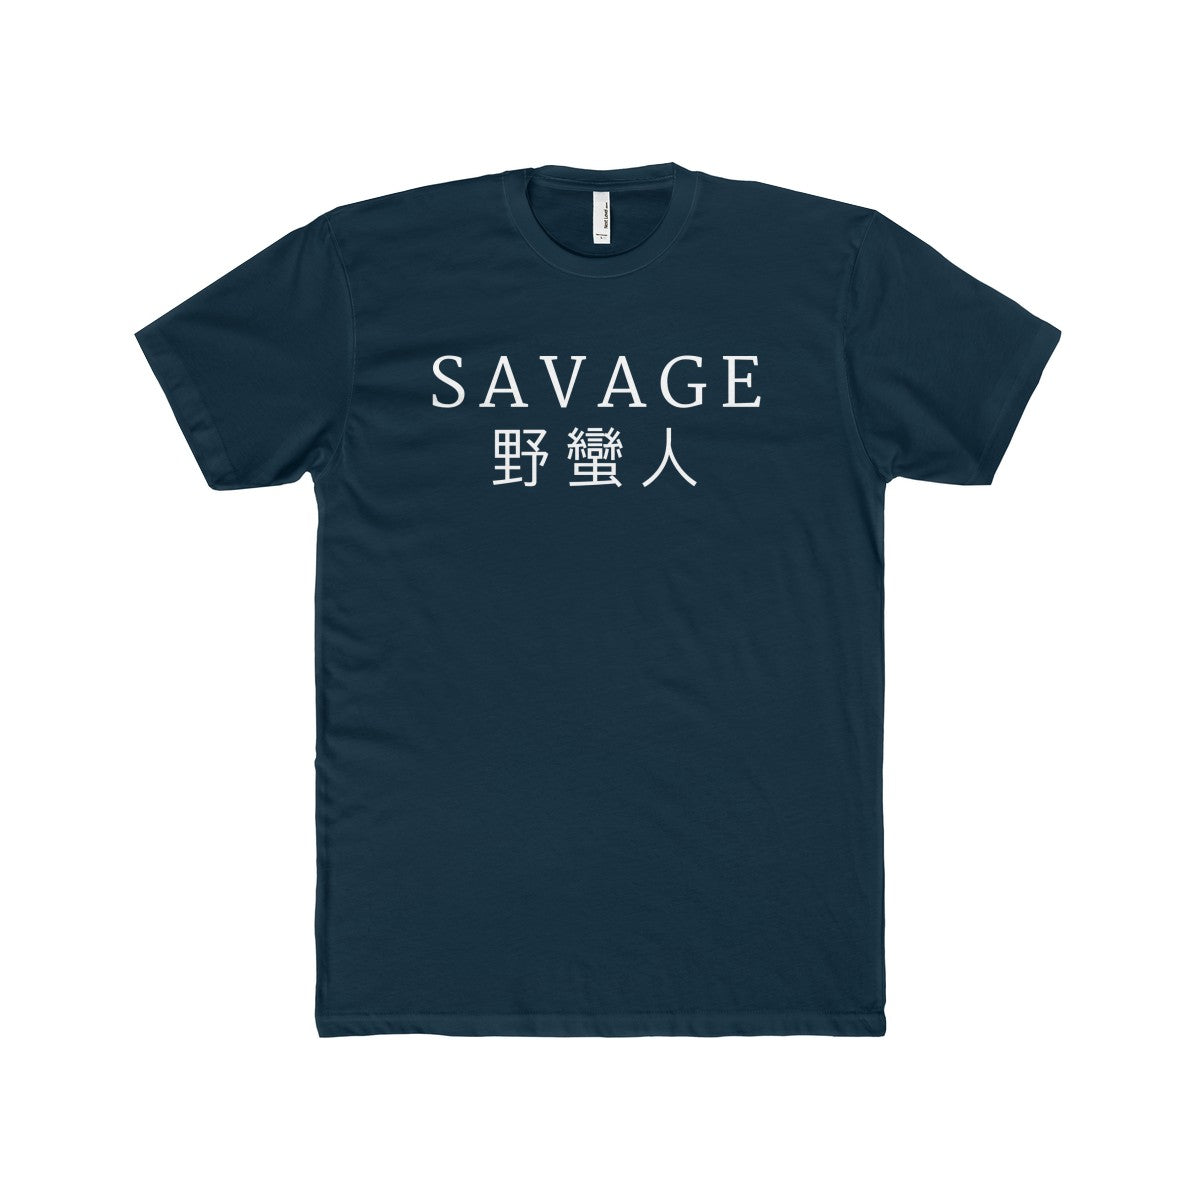 The Absolute Savage | Men's Fitted Tee FL, T-Shirt, SJ Corbyn